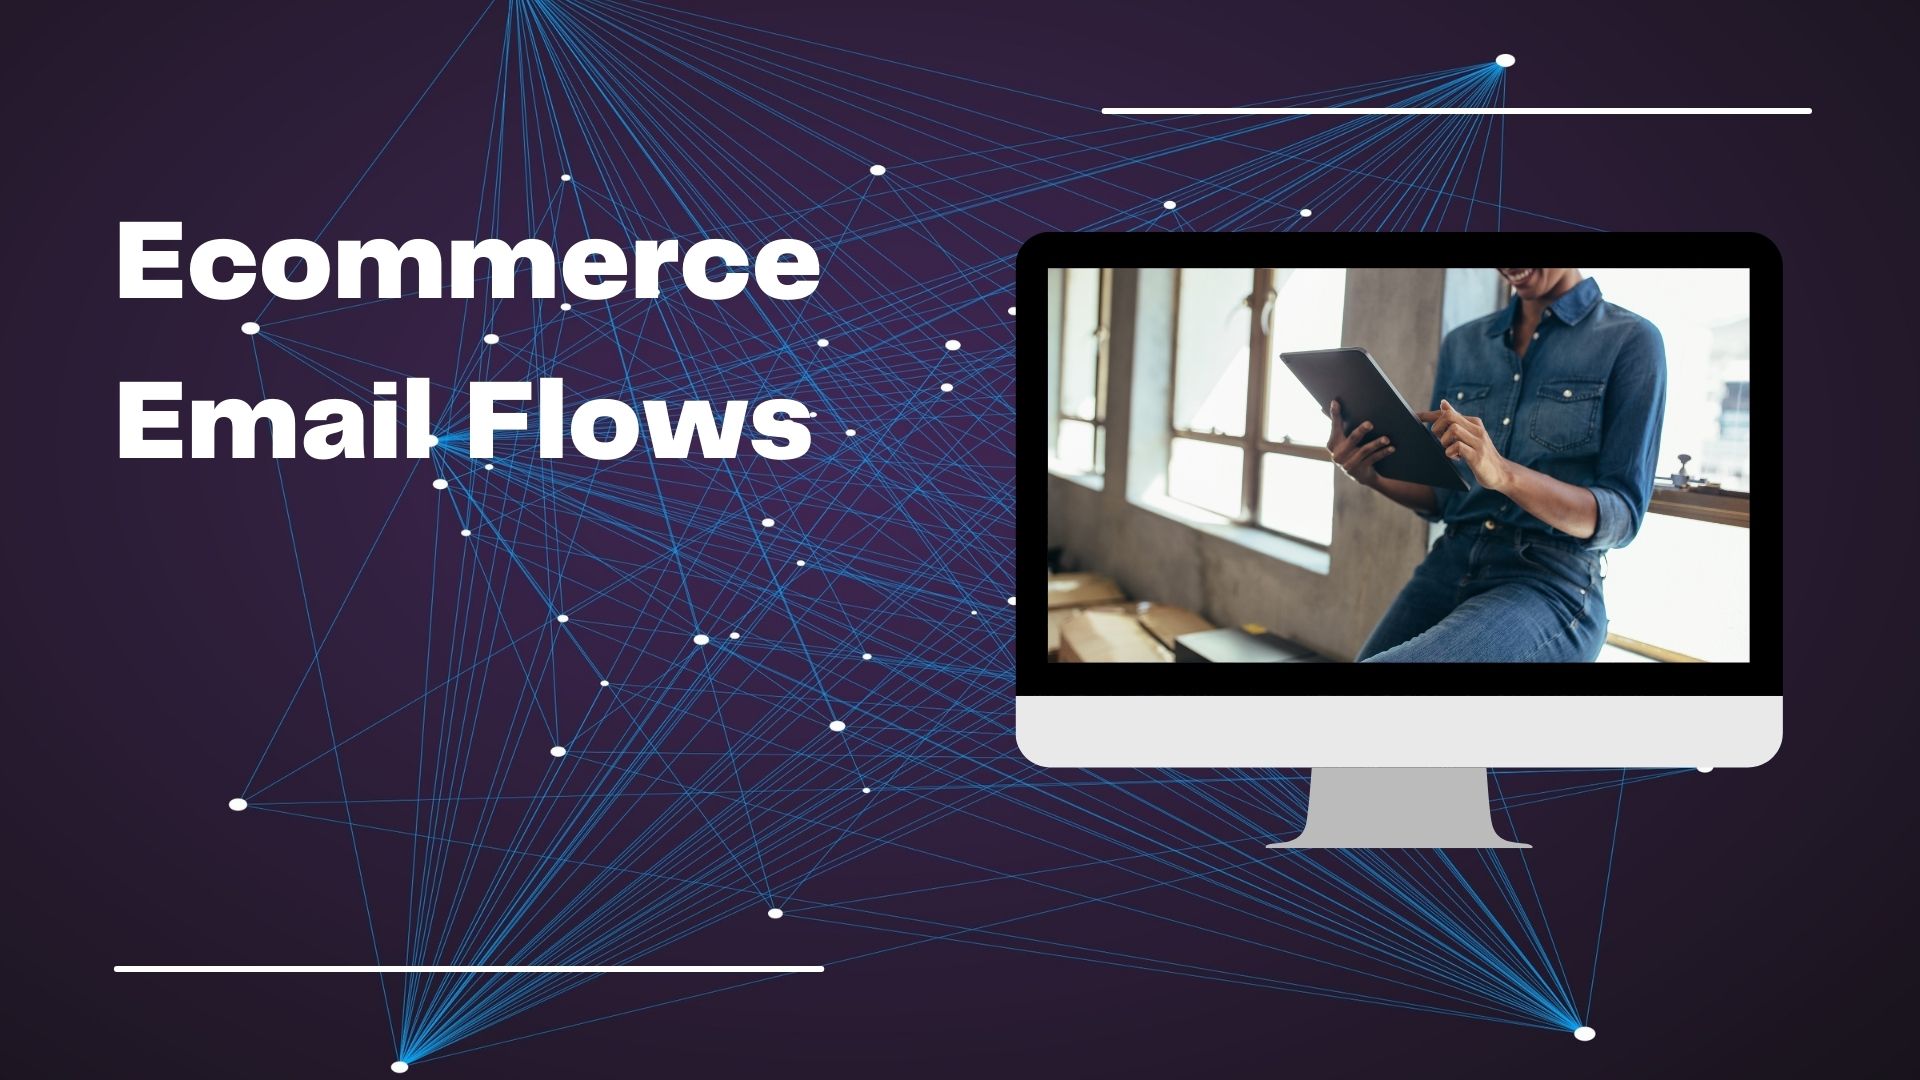 Ecommerce Email Flows